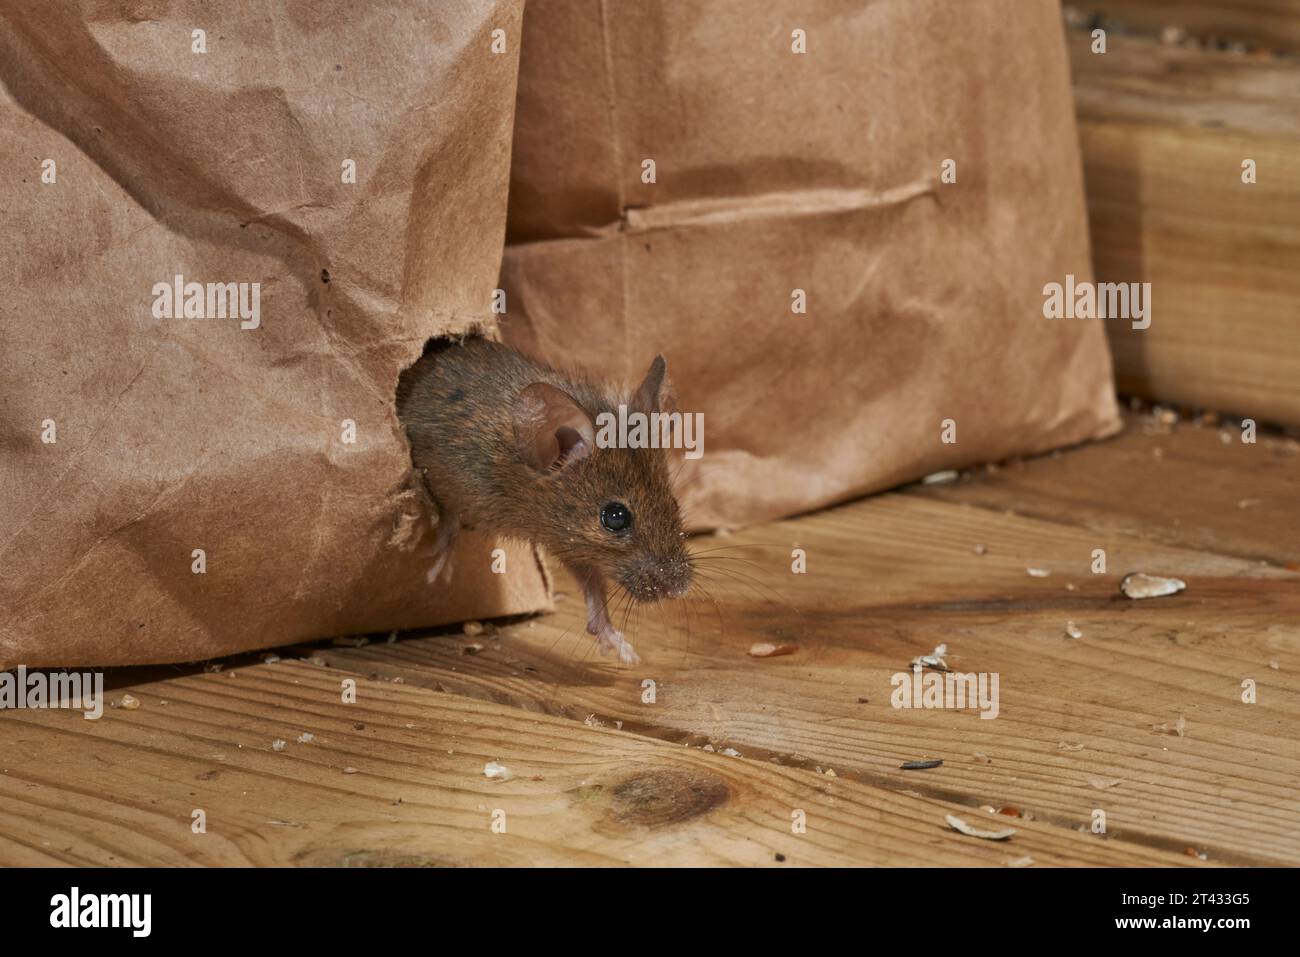 House mouse (Mus musculus), Greater Manchester, UK. Eating bird food from hole chewed in bag. Stock Photo